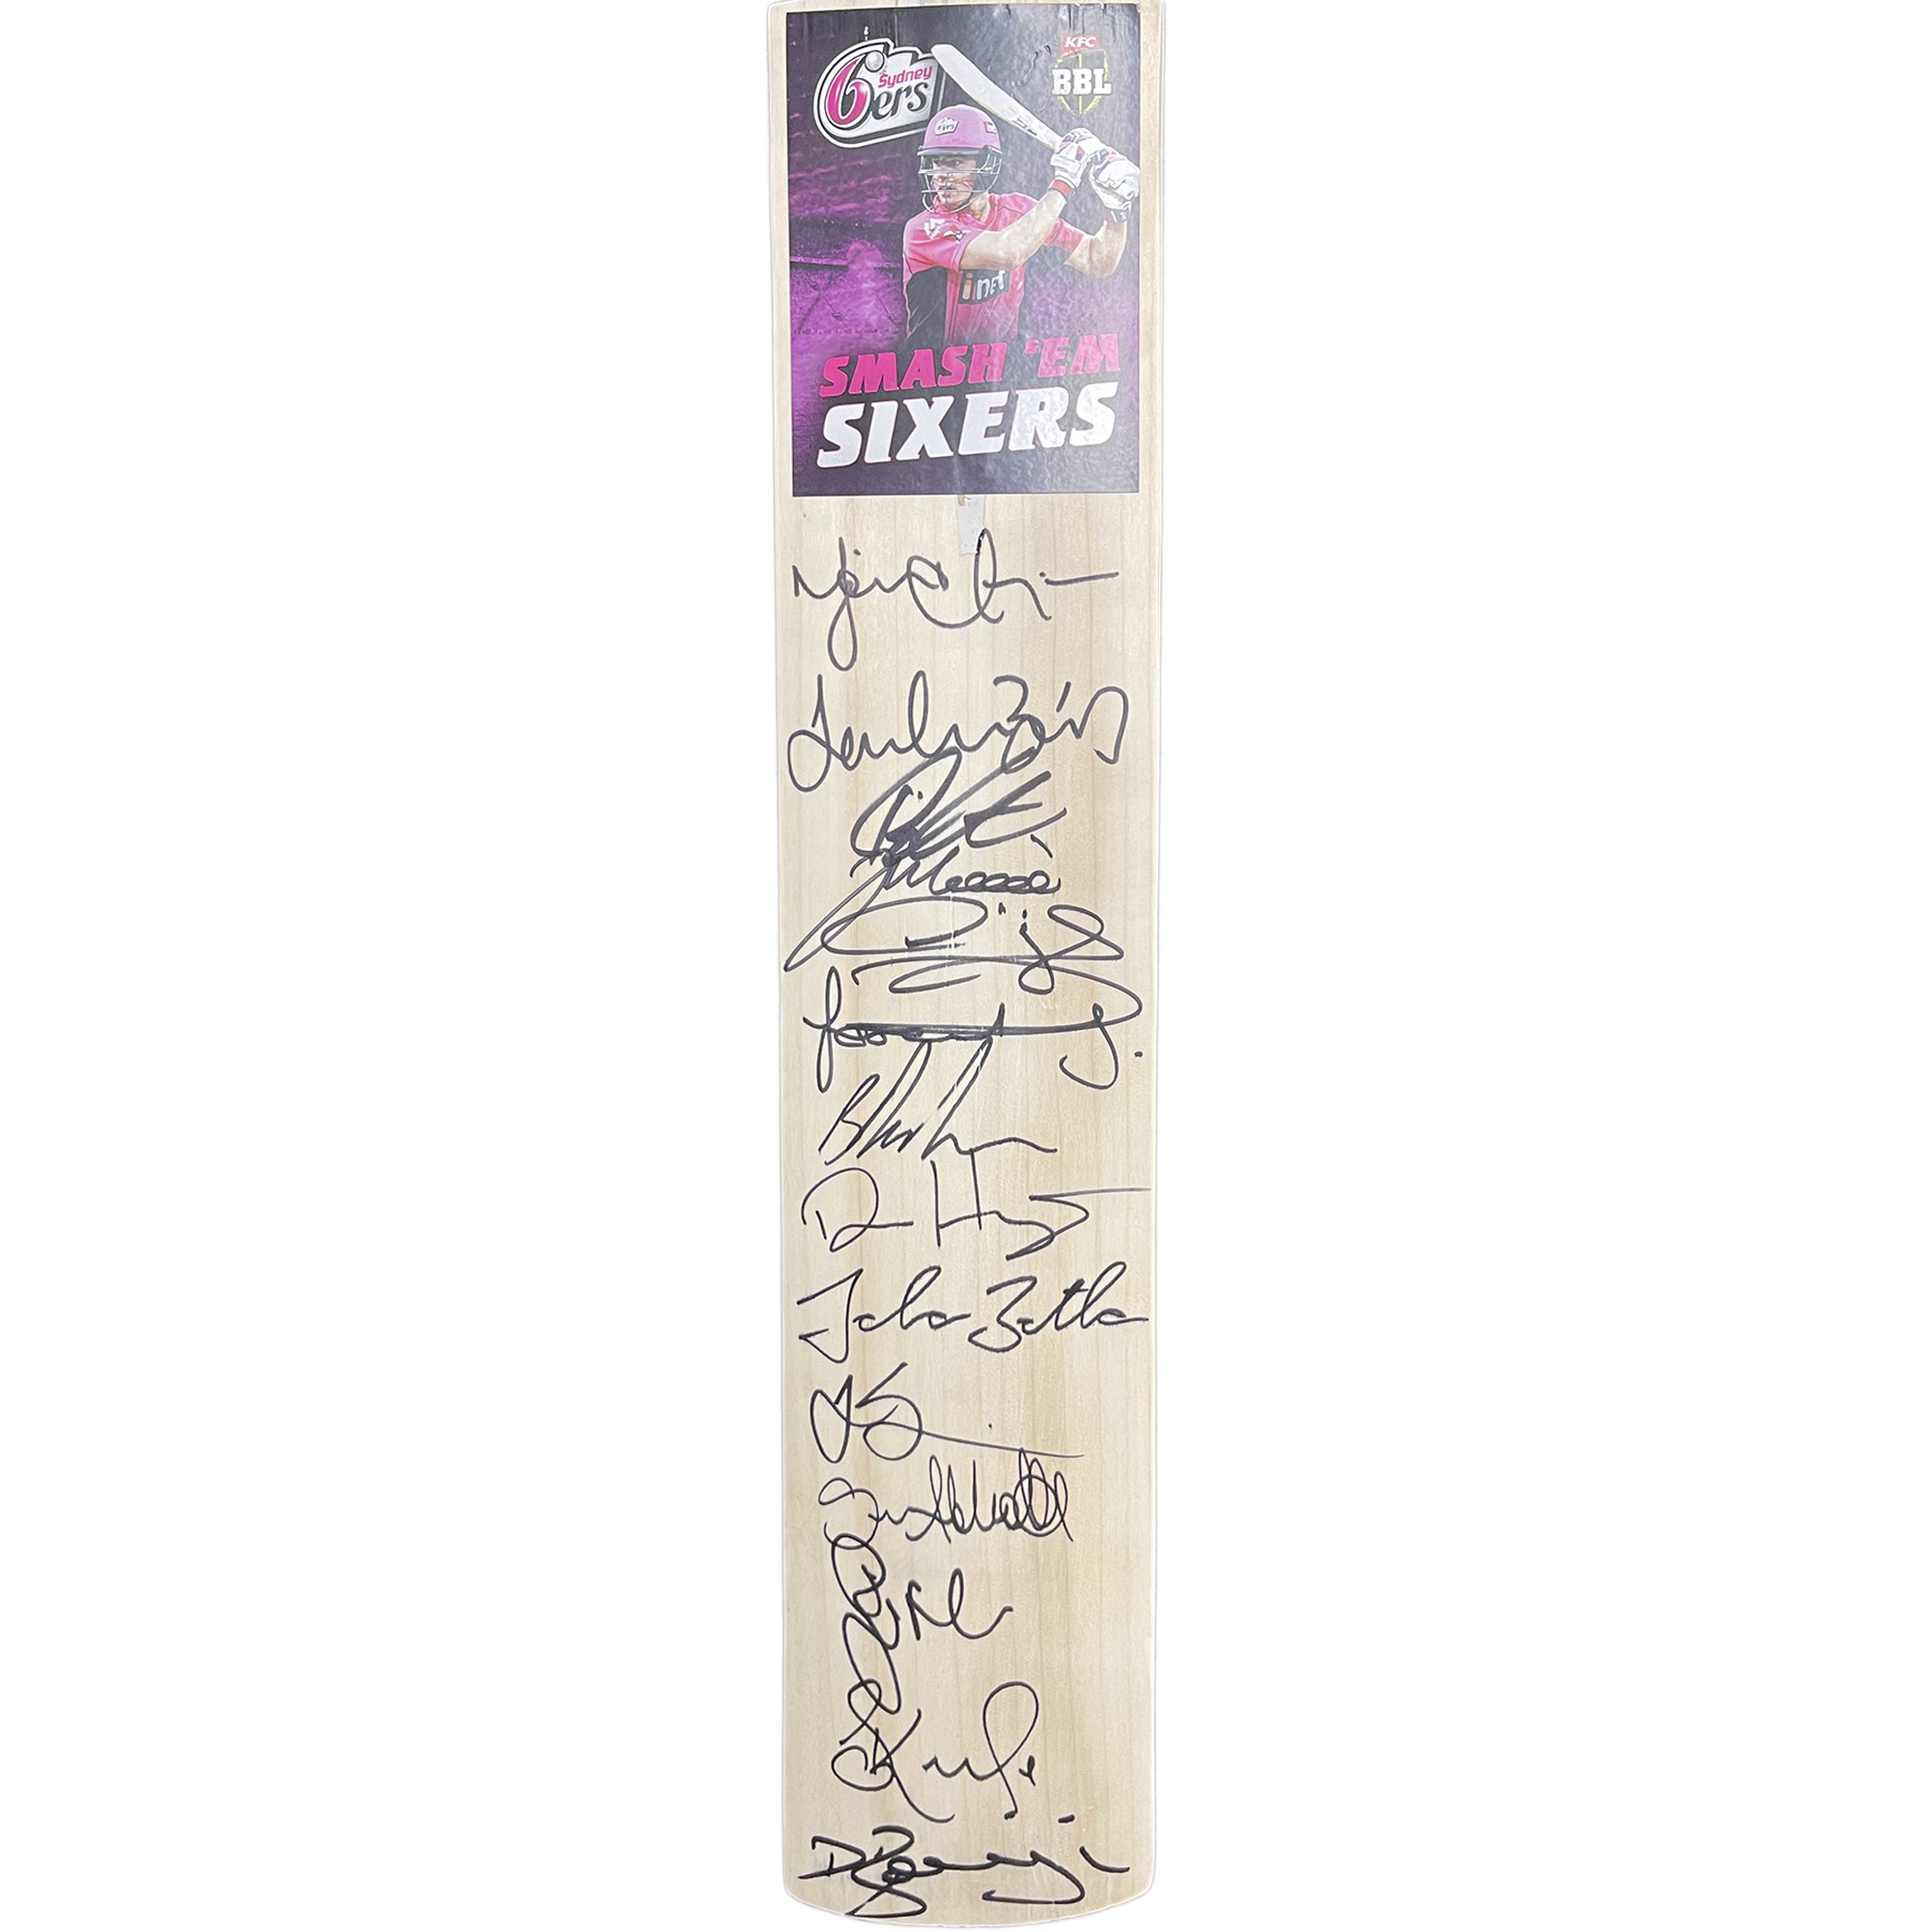 Sydney Sixers on X: Want to own a signed Sydney Sixers playing